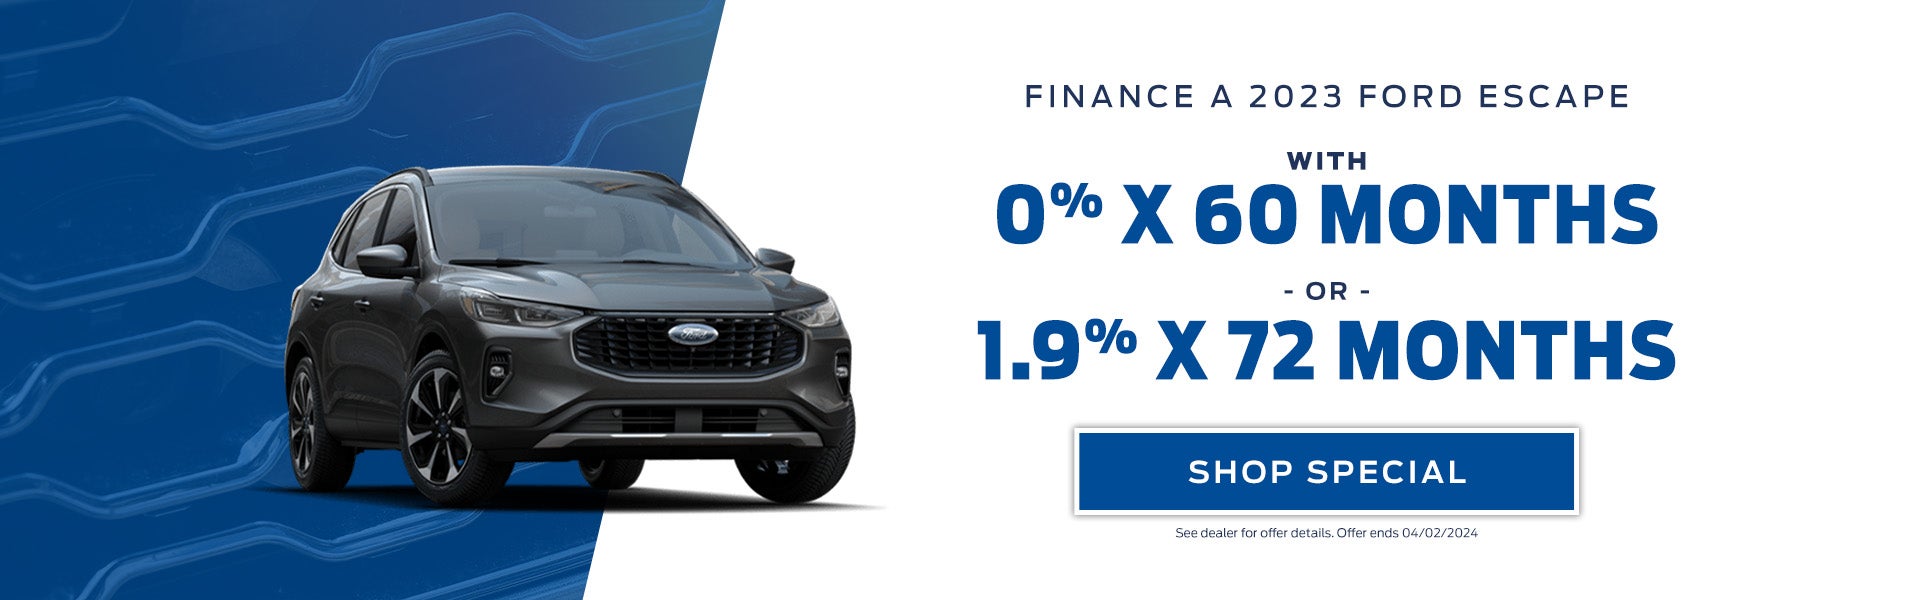 finance a 2023 Ford Escape with 0% for 60 months 